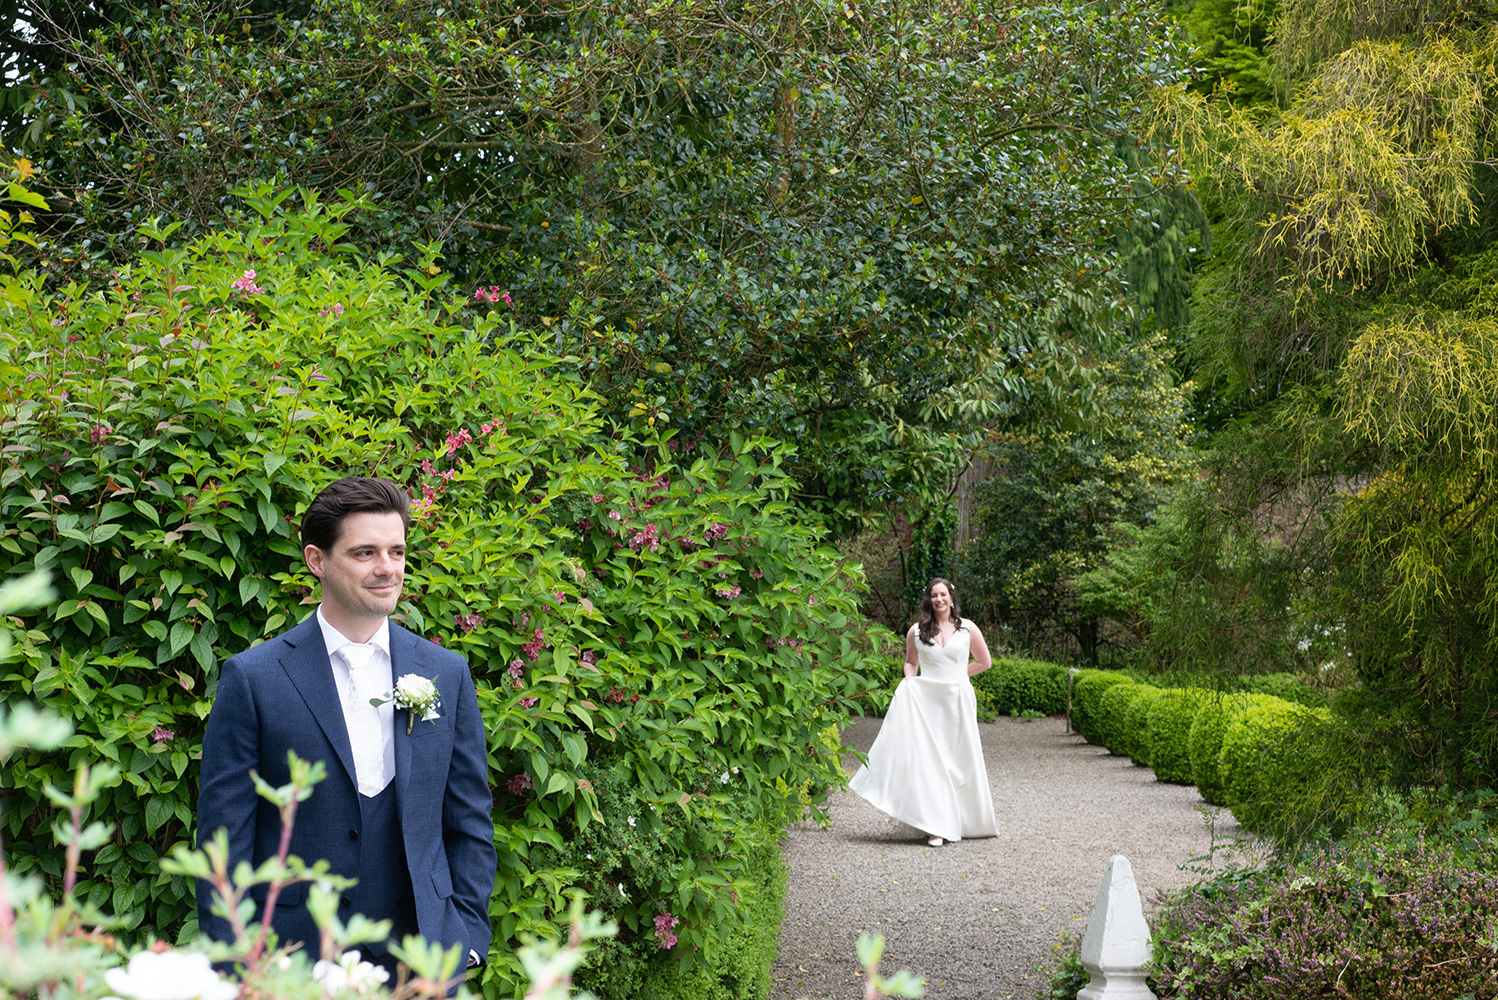 bride doing first look at Rathsallagh House gardens before wedding ceremony